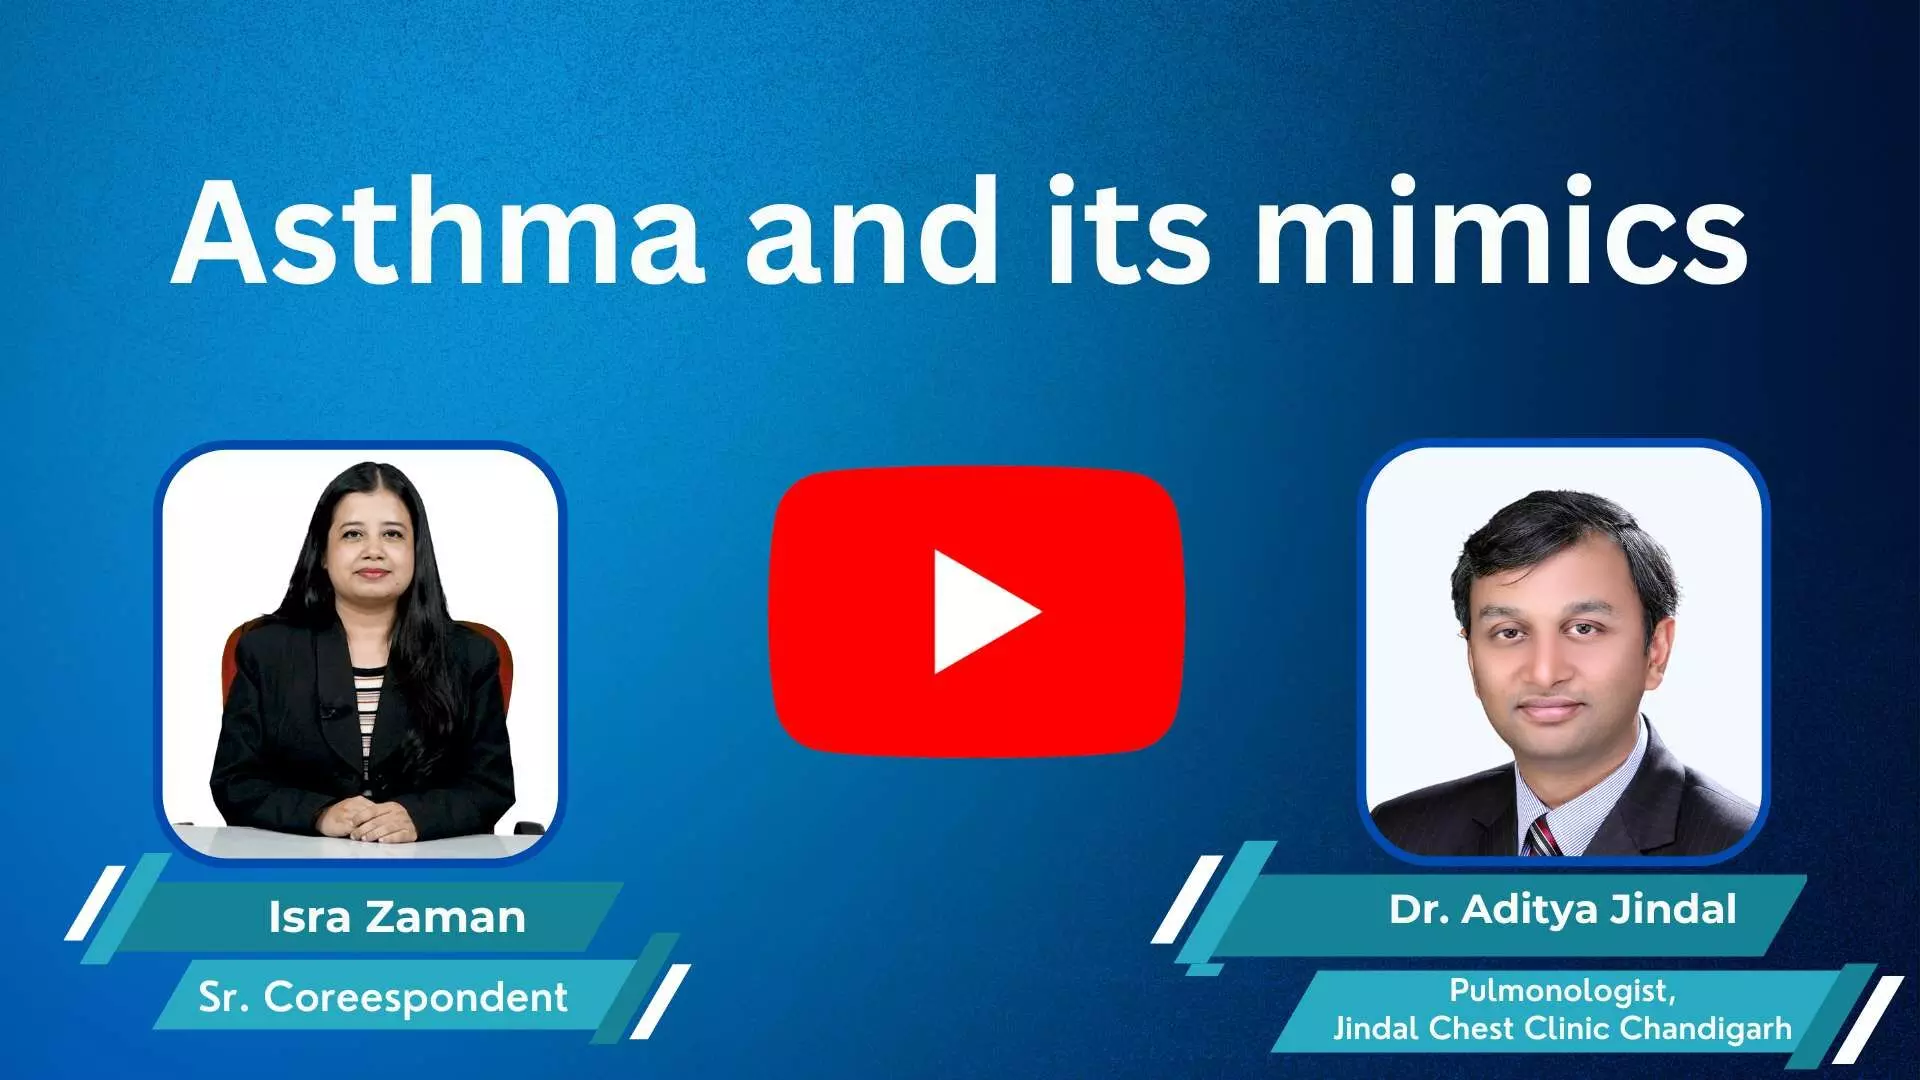 Understand asthma and its mimics with Dr. Aditya Jindal